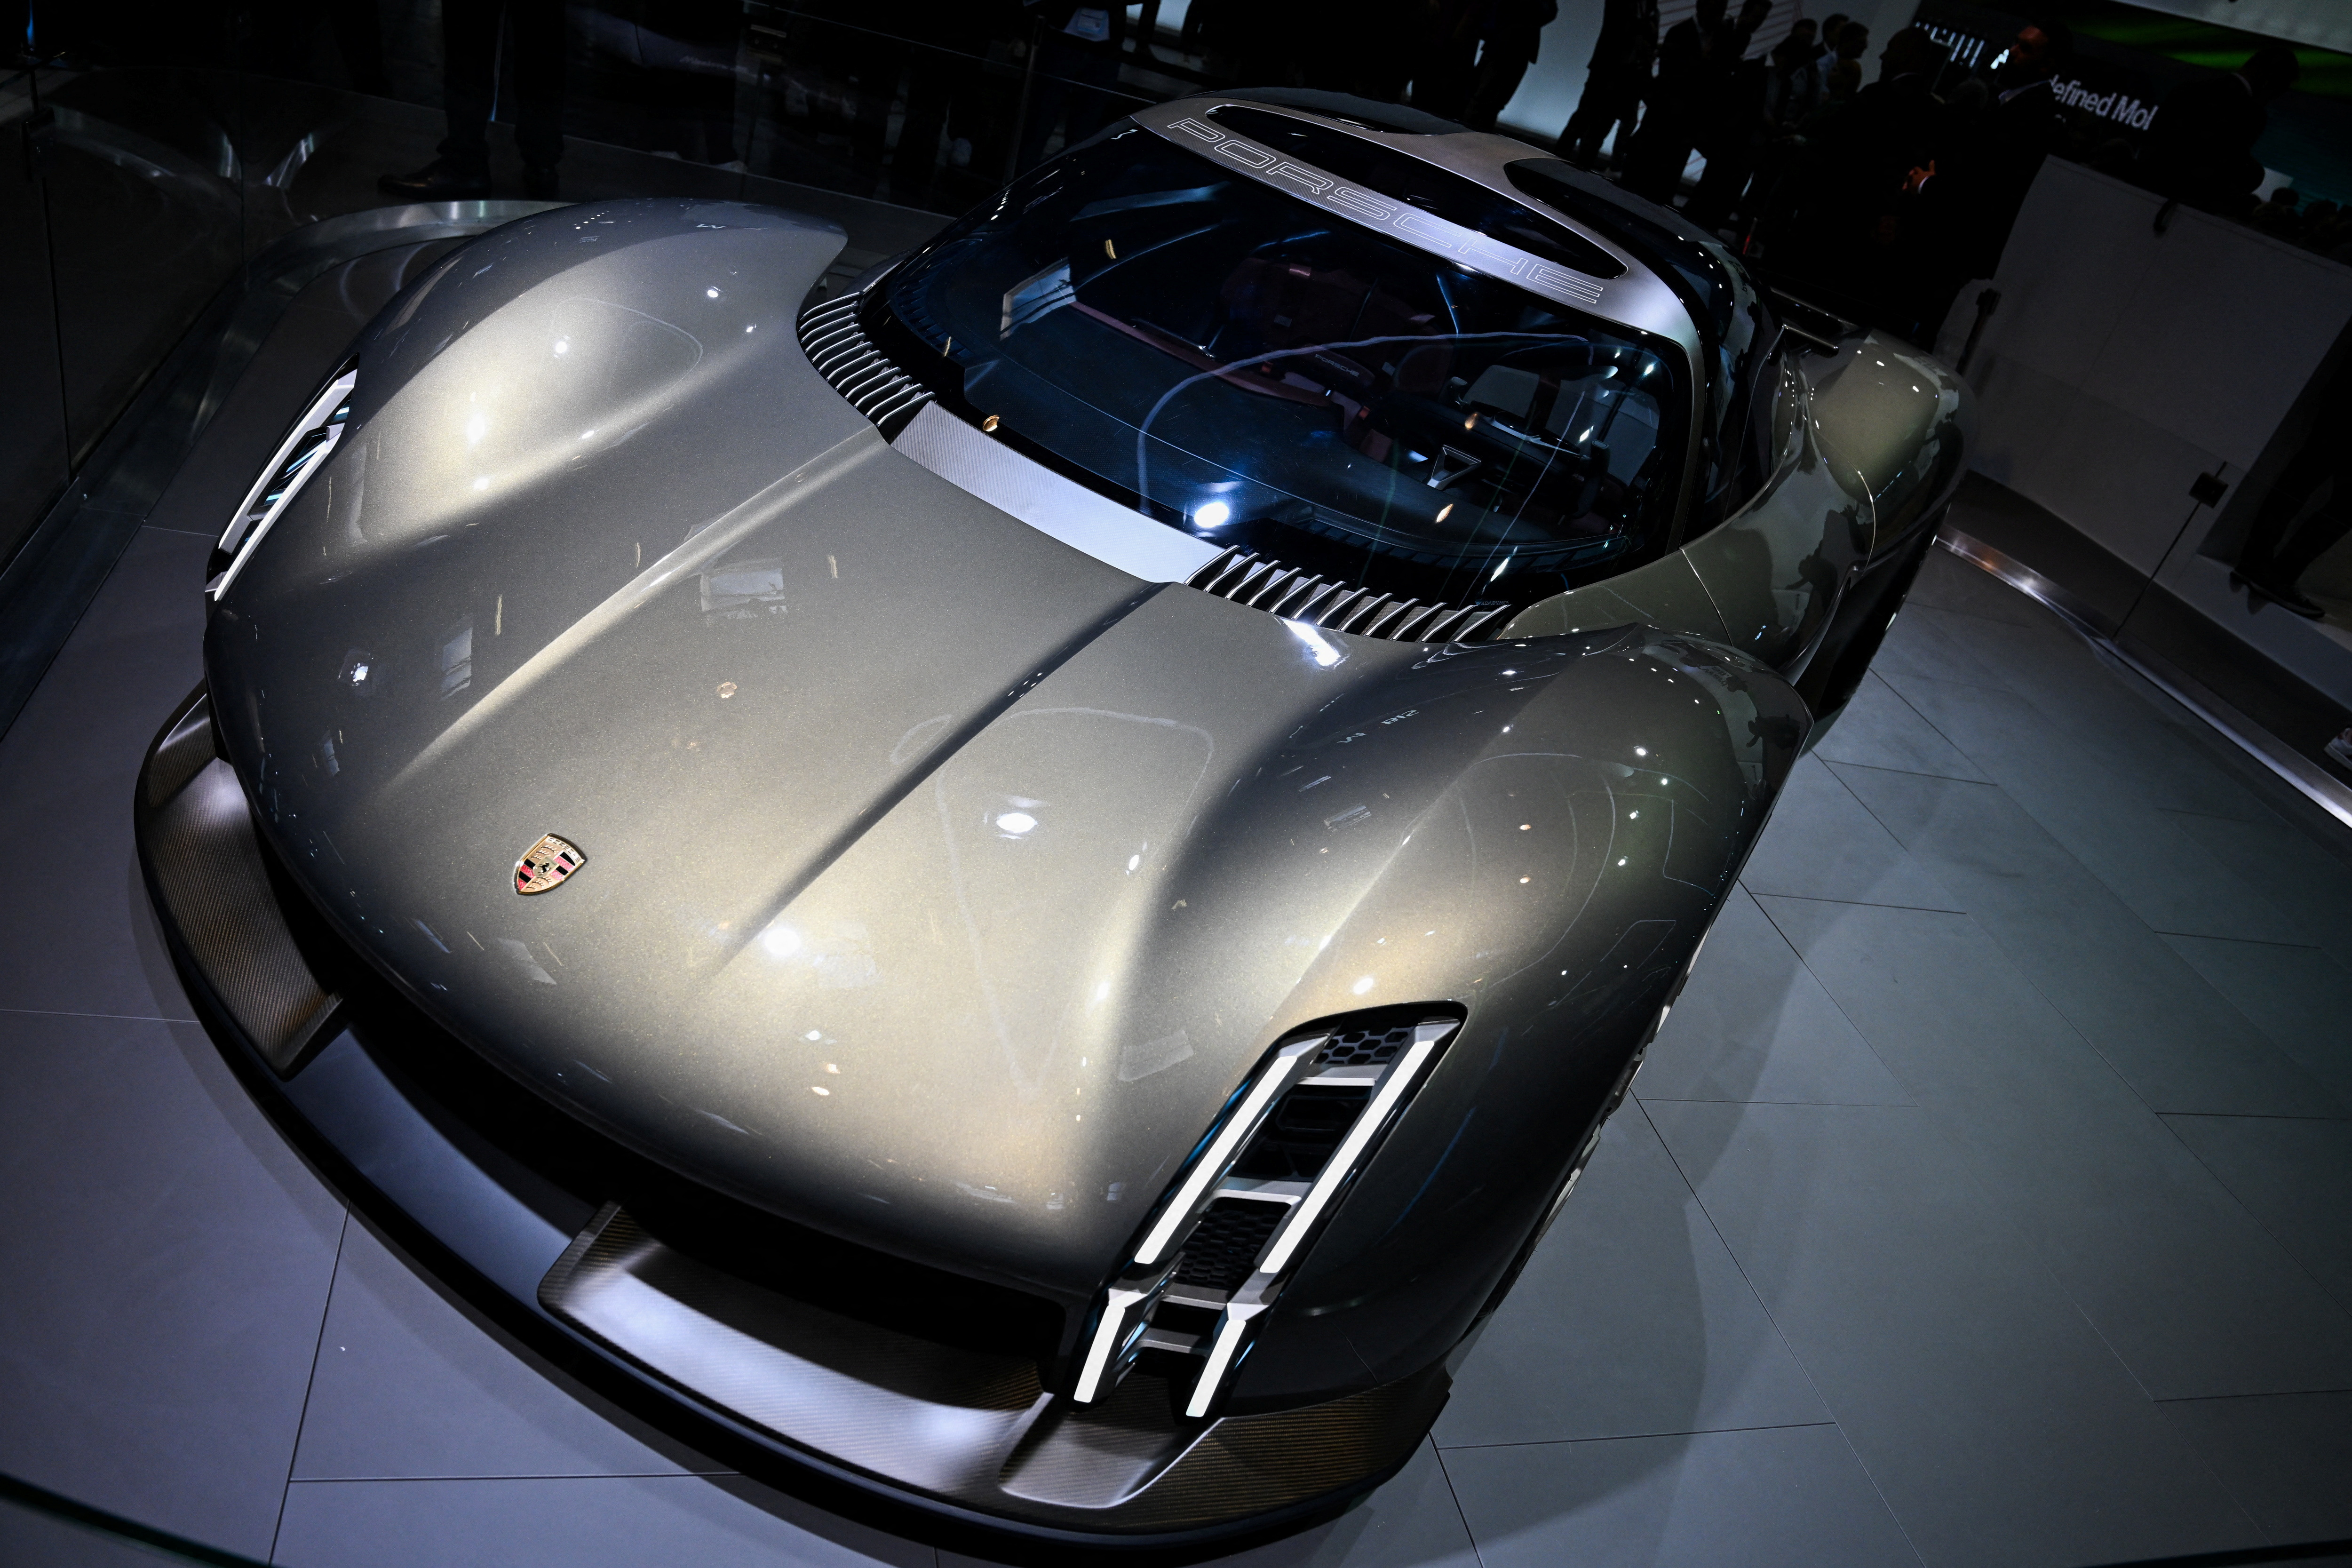 Porsche warns luxury not immune to economic woes as shares hit 1